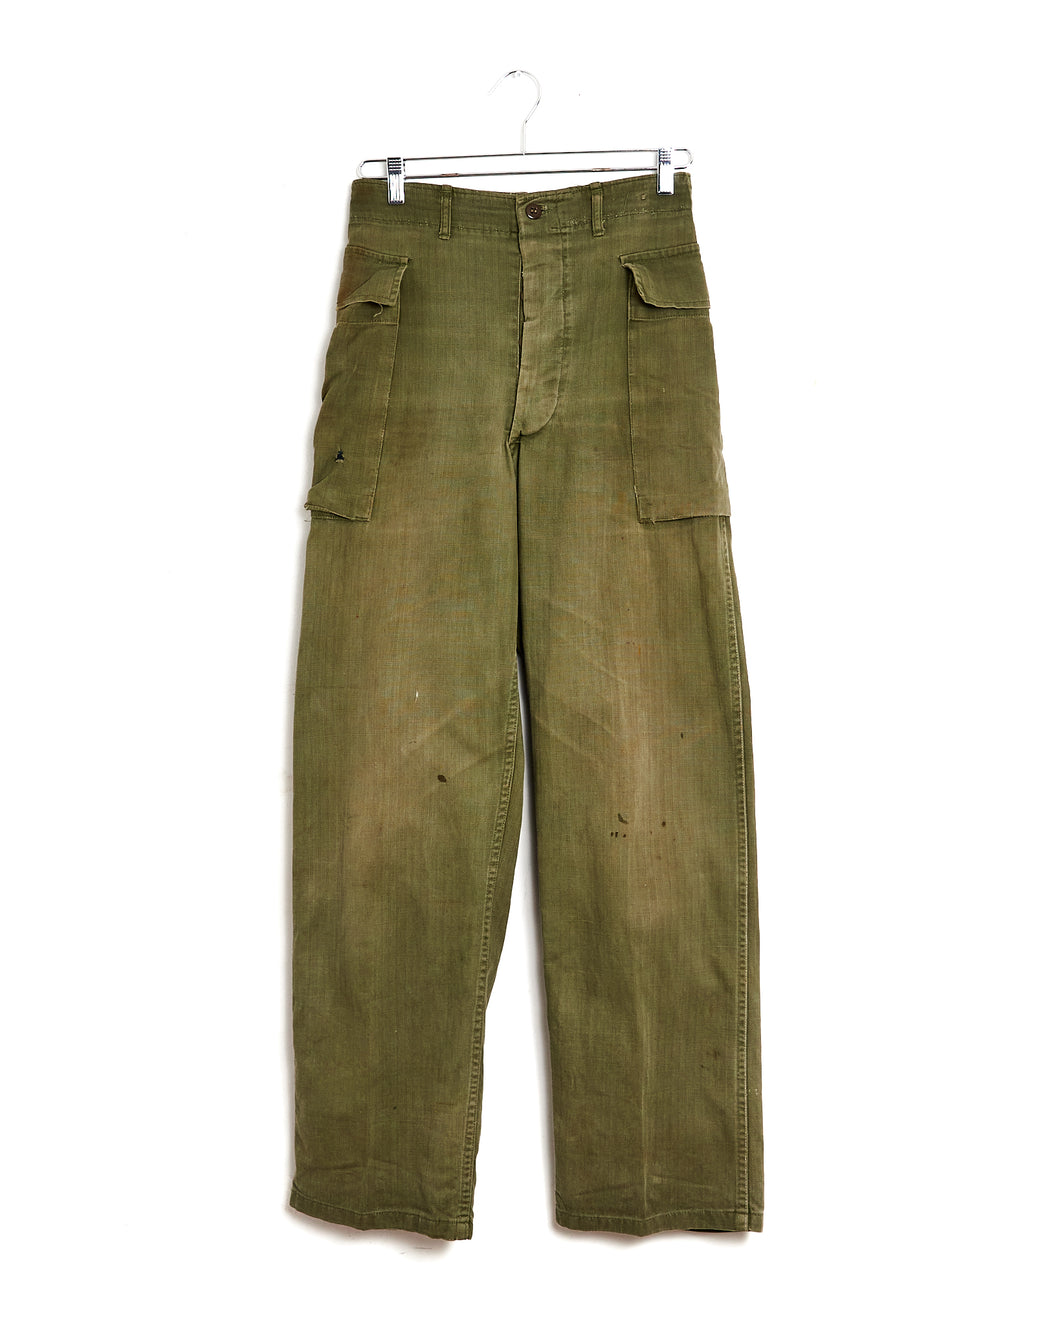 1940s US Army WWII 2nd Pattern HBT Trousers - 28x30